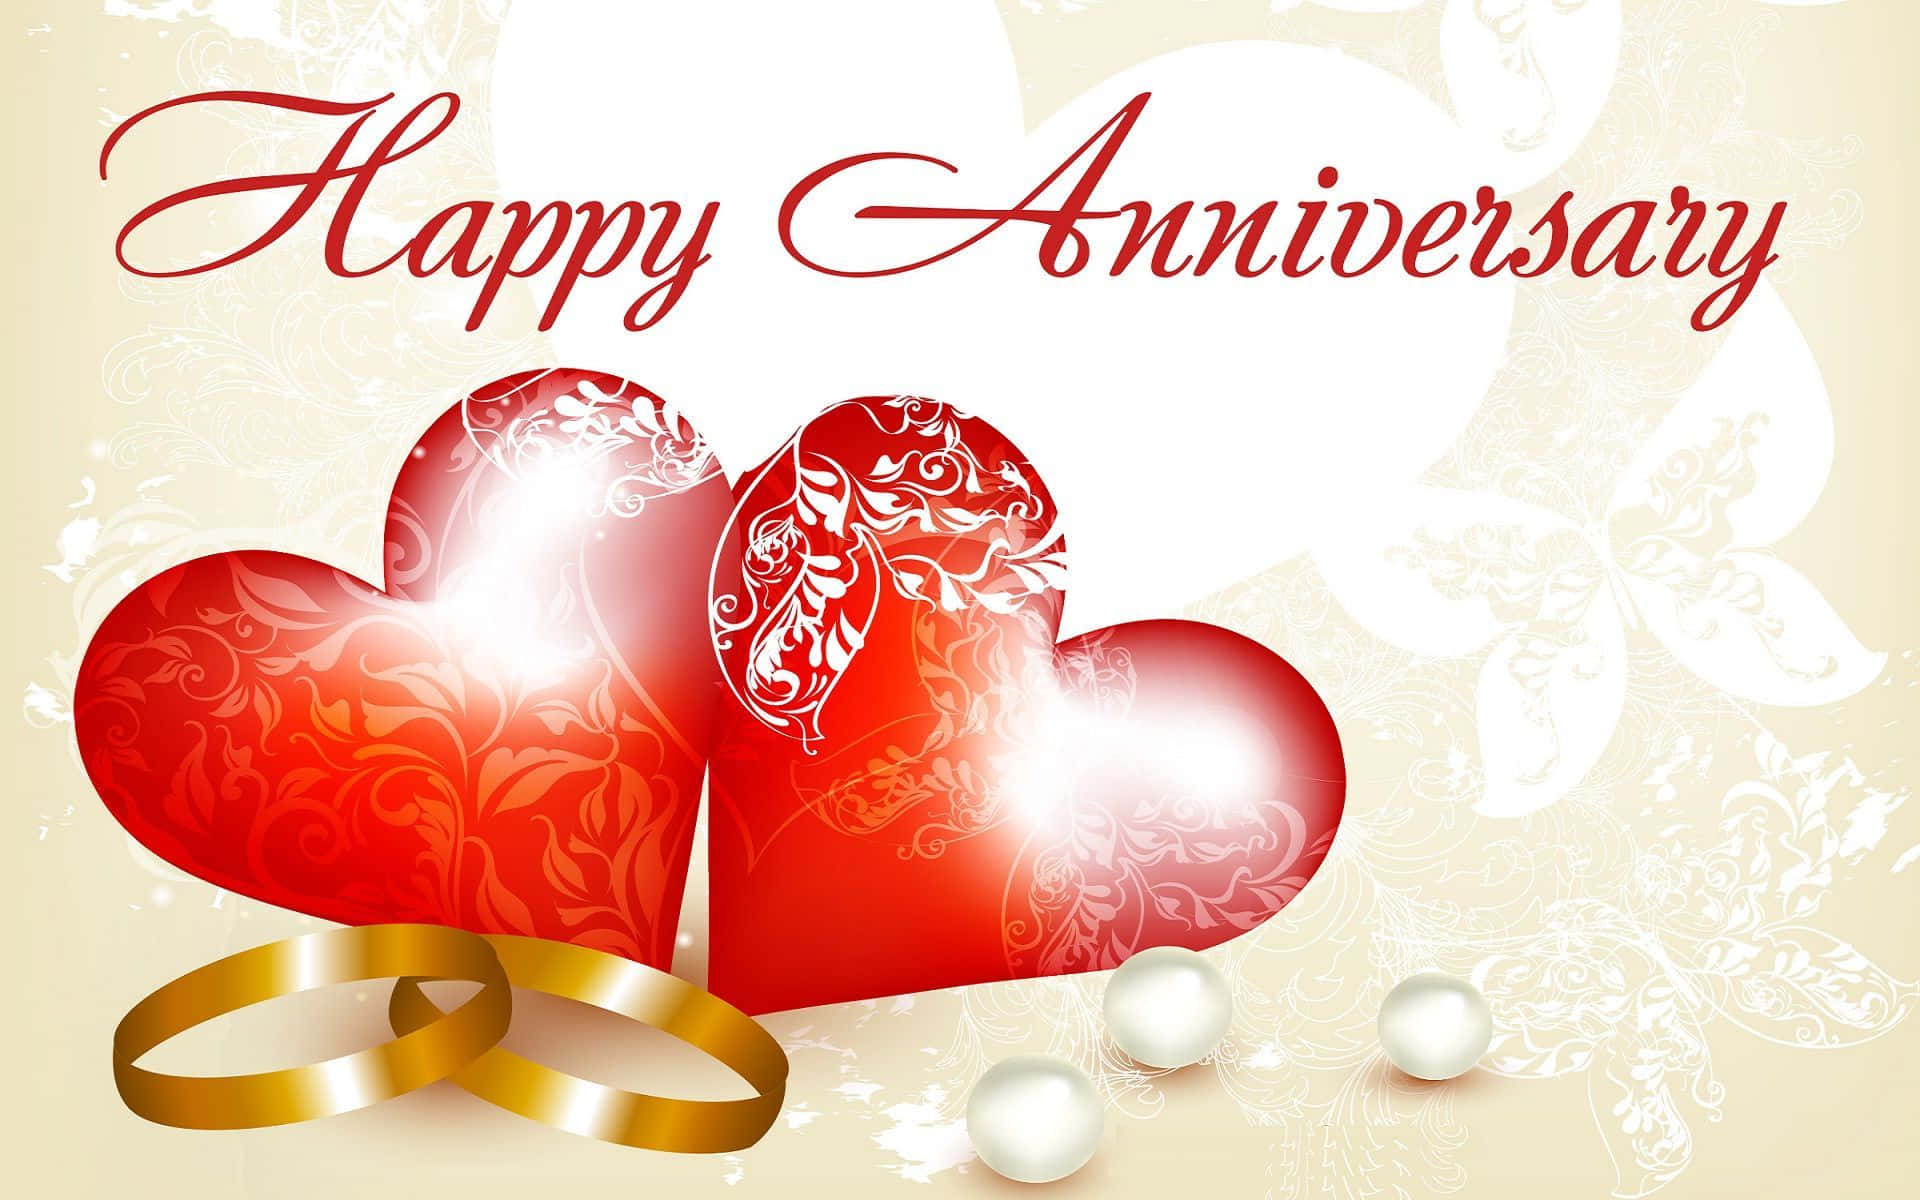 Celebrate another year of love and happiness